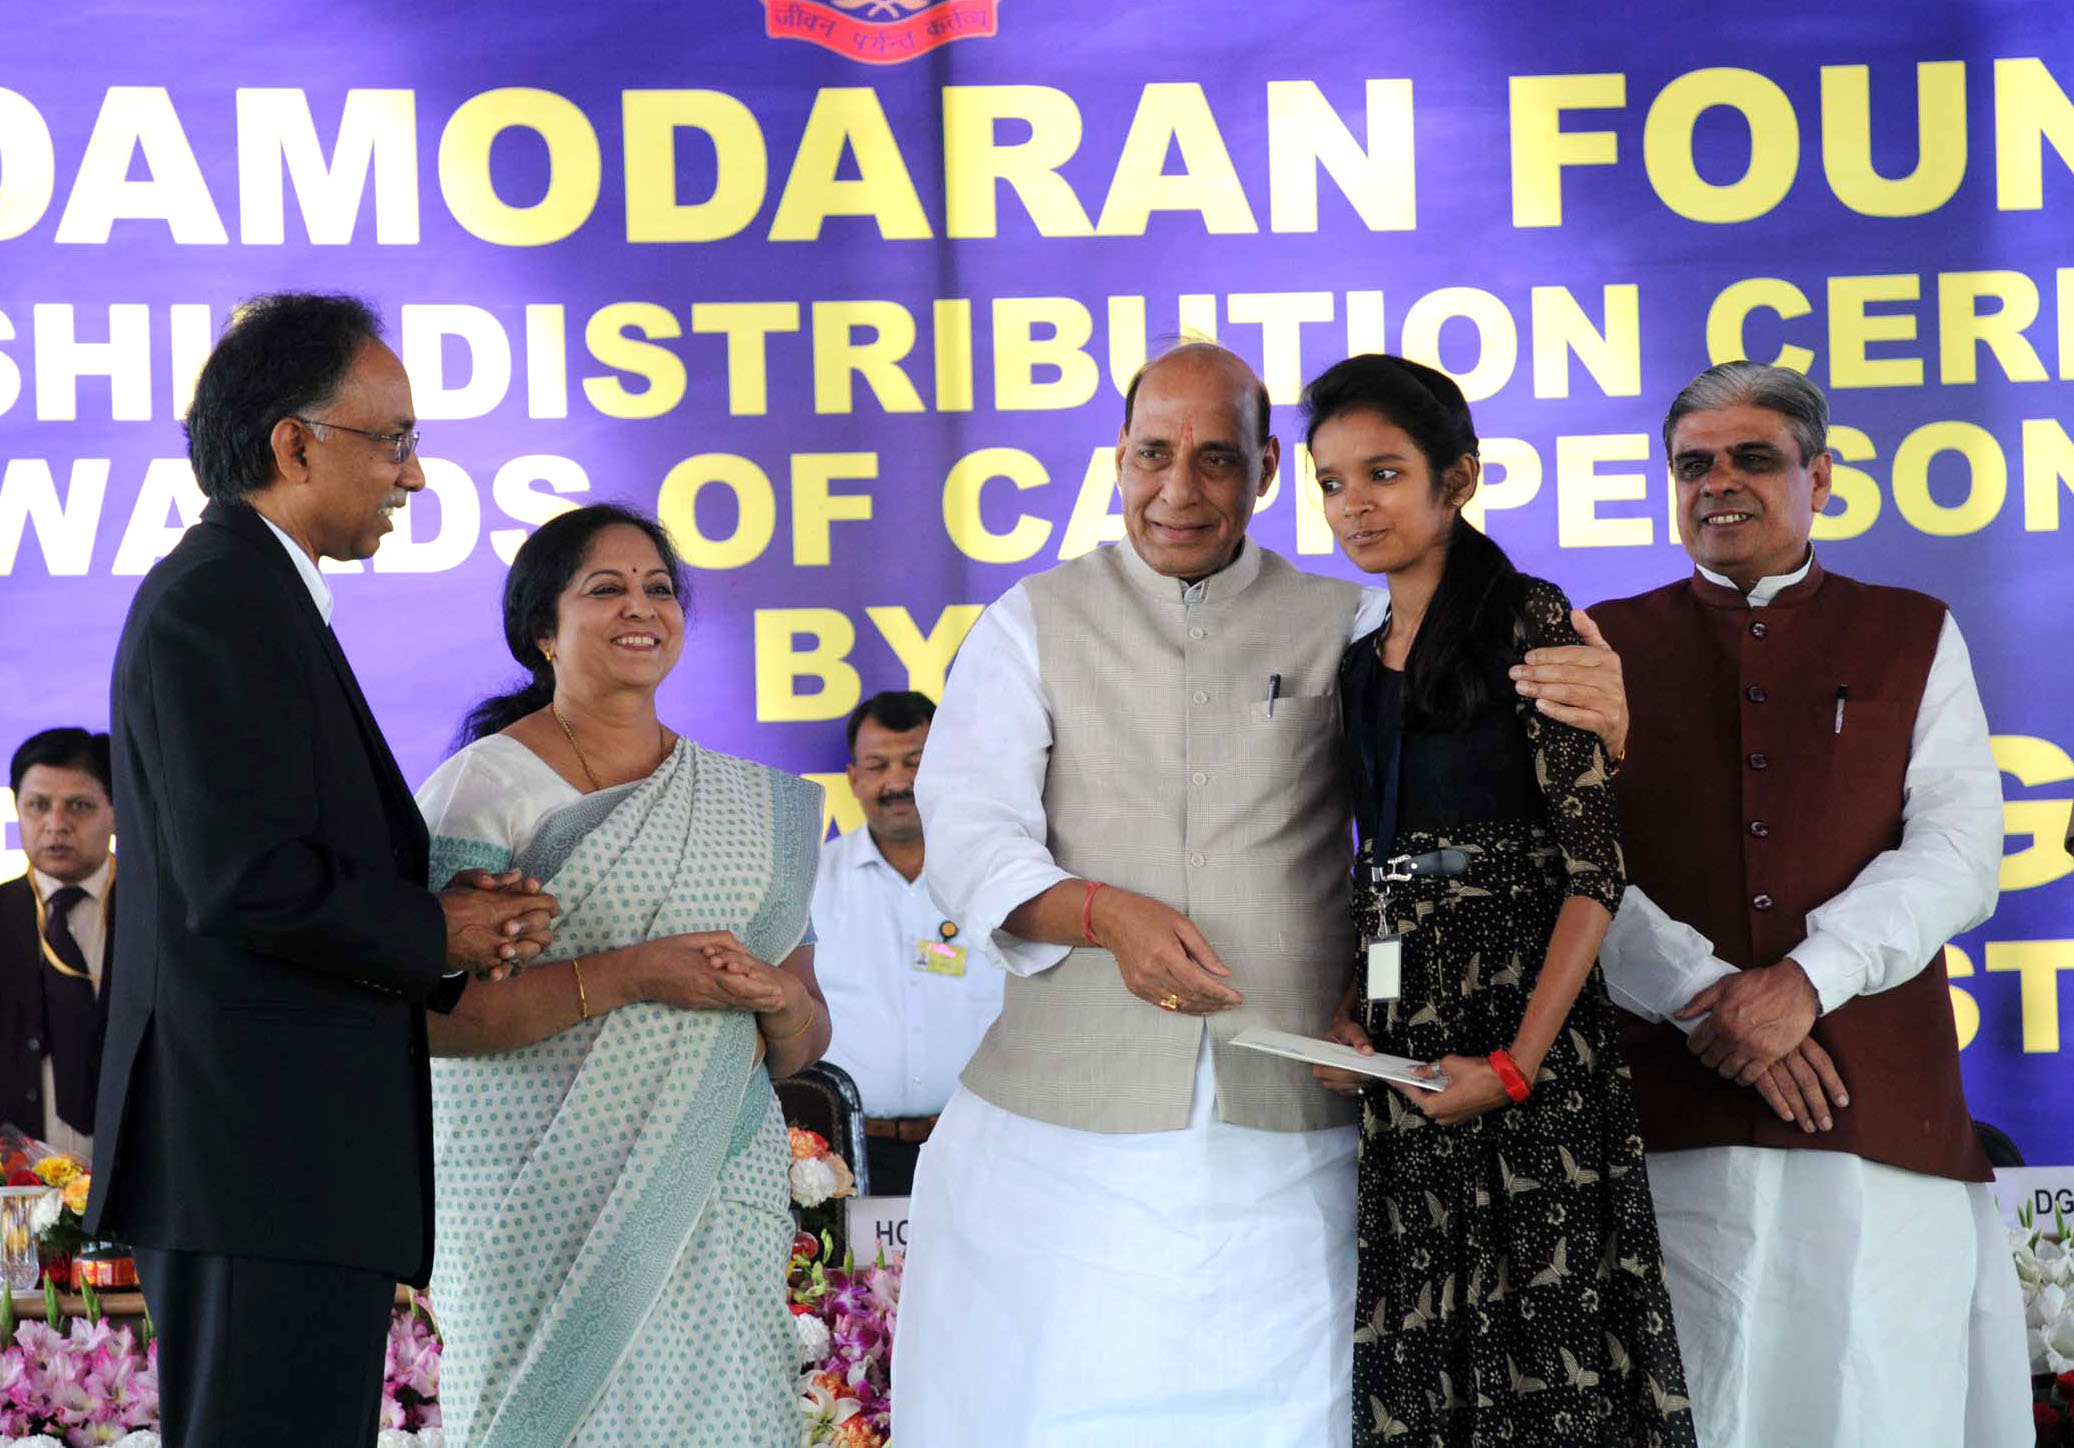 The Union Home Minister, Shri Rajnath Singh distributed the Sarojini Damodaran Foundation Scholarship, at a function, in New Delhi on March 18, 2016. 	The Minister of State for Home Affairs, Shri Haribhai Parthibhai Chaudhary and other dignitaries are also seen.